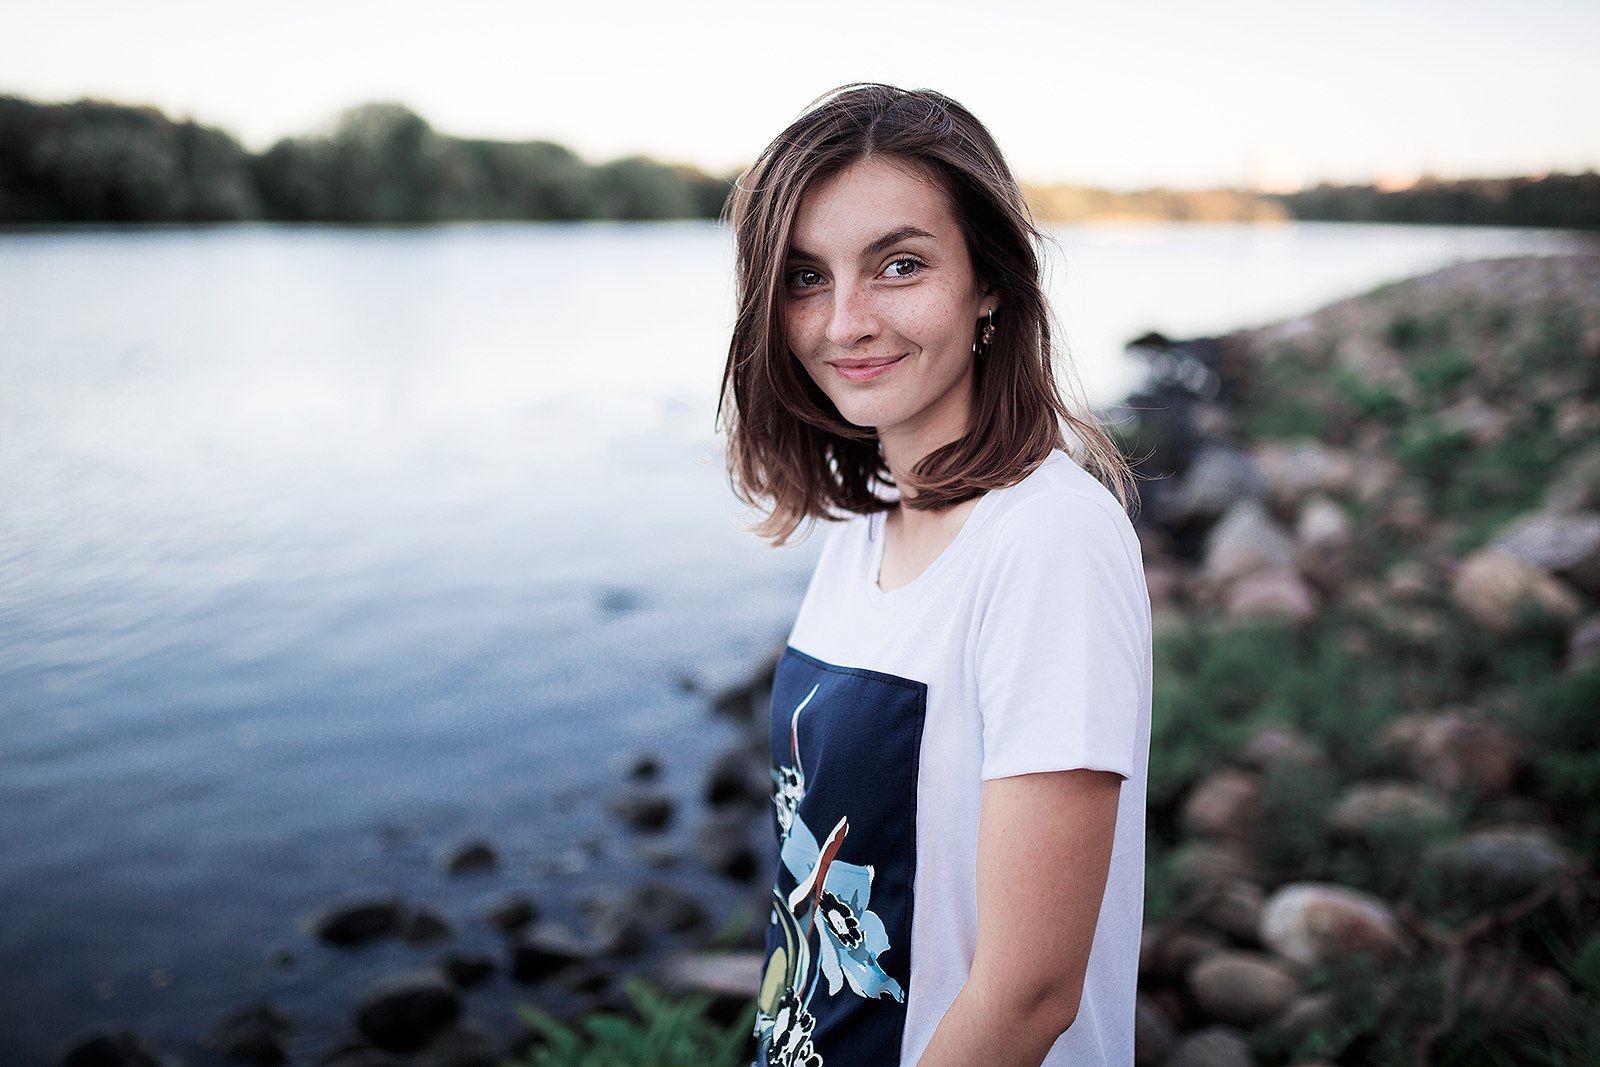 Personal photoshoot for a girl near a river